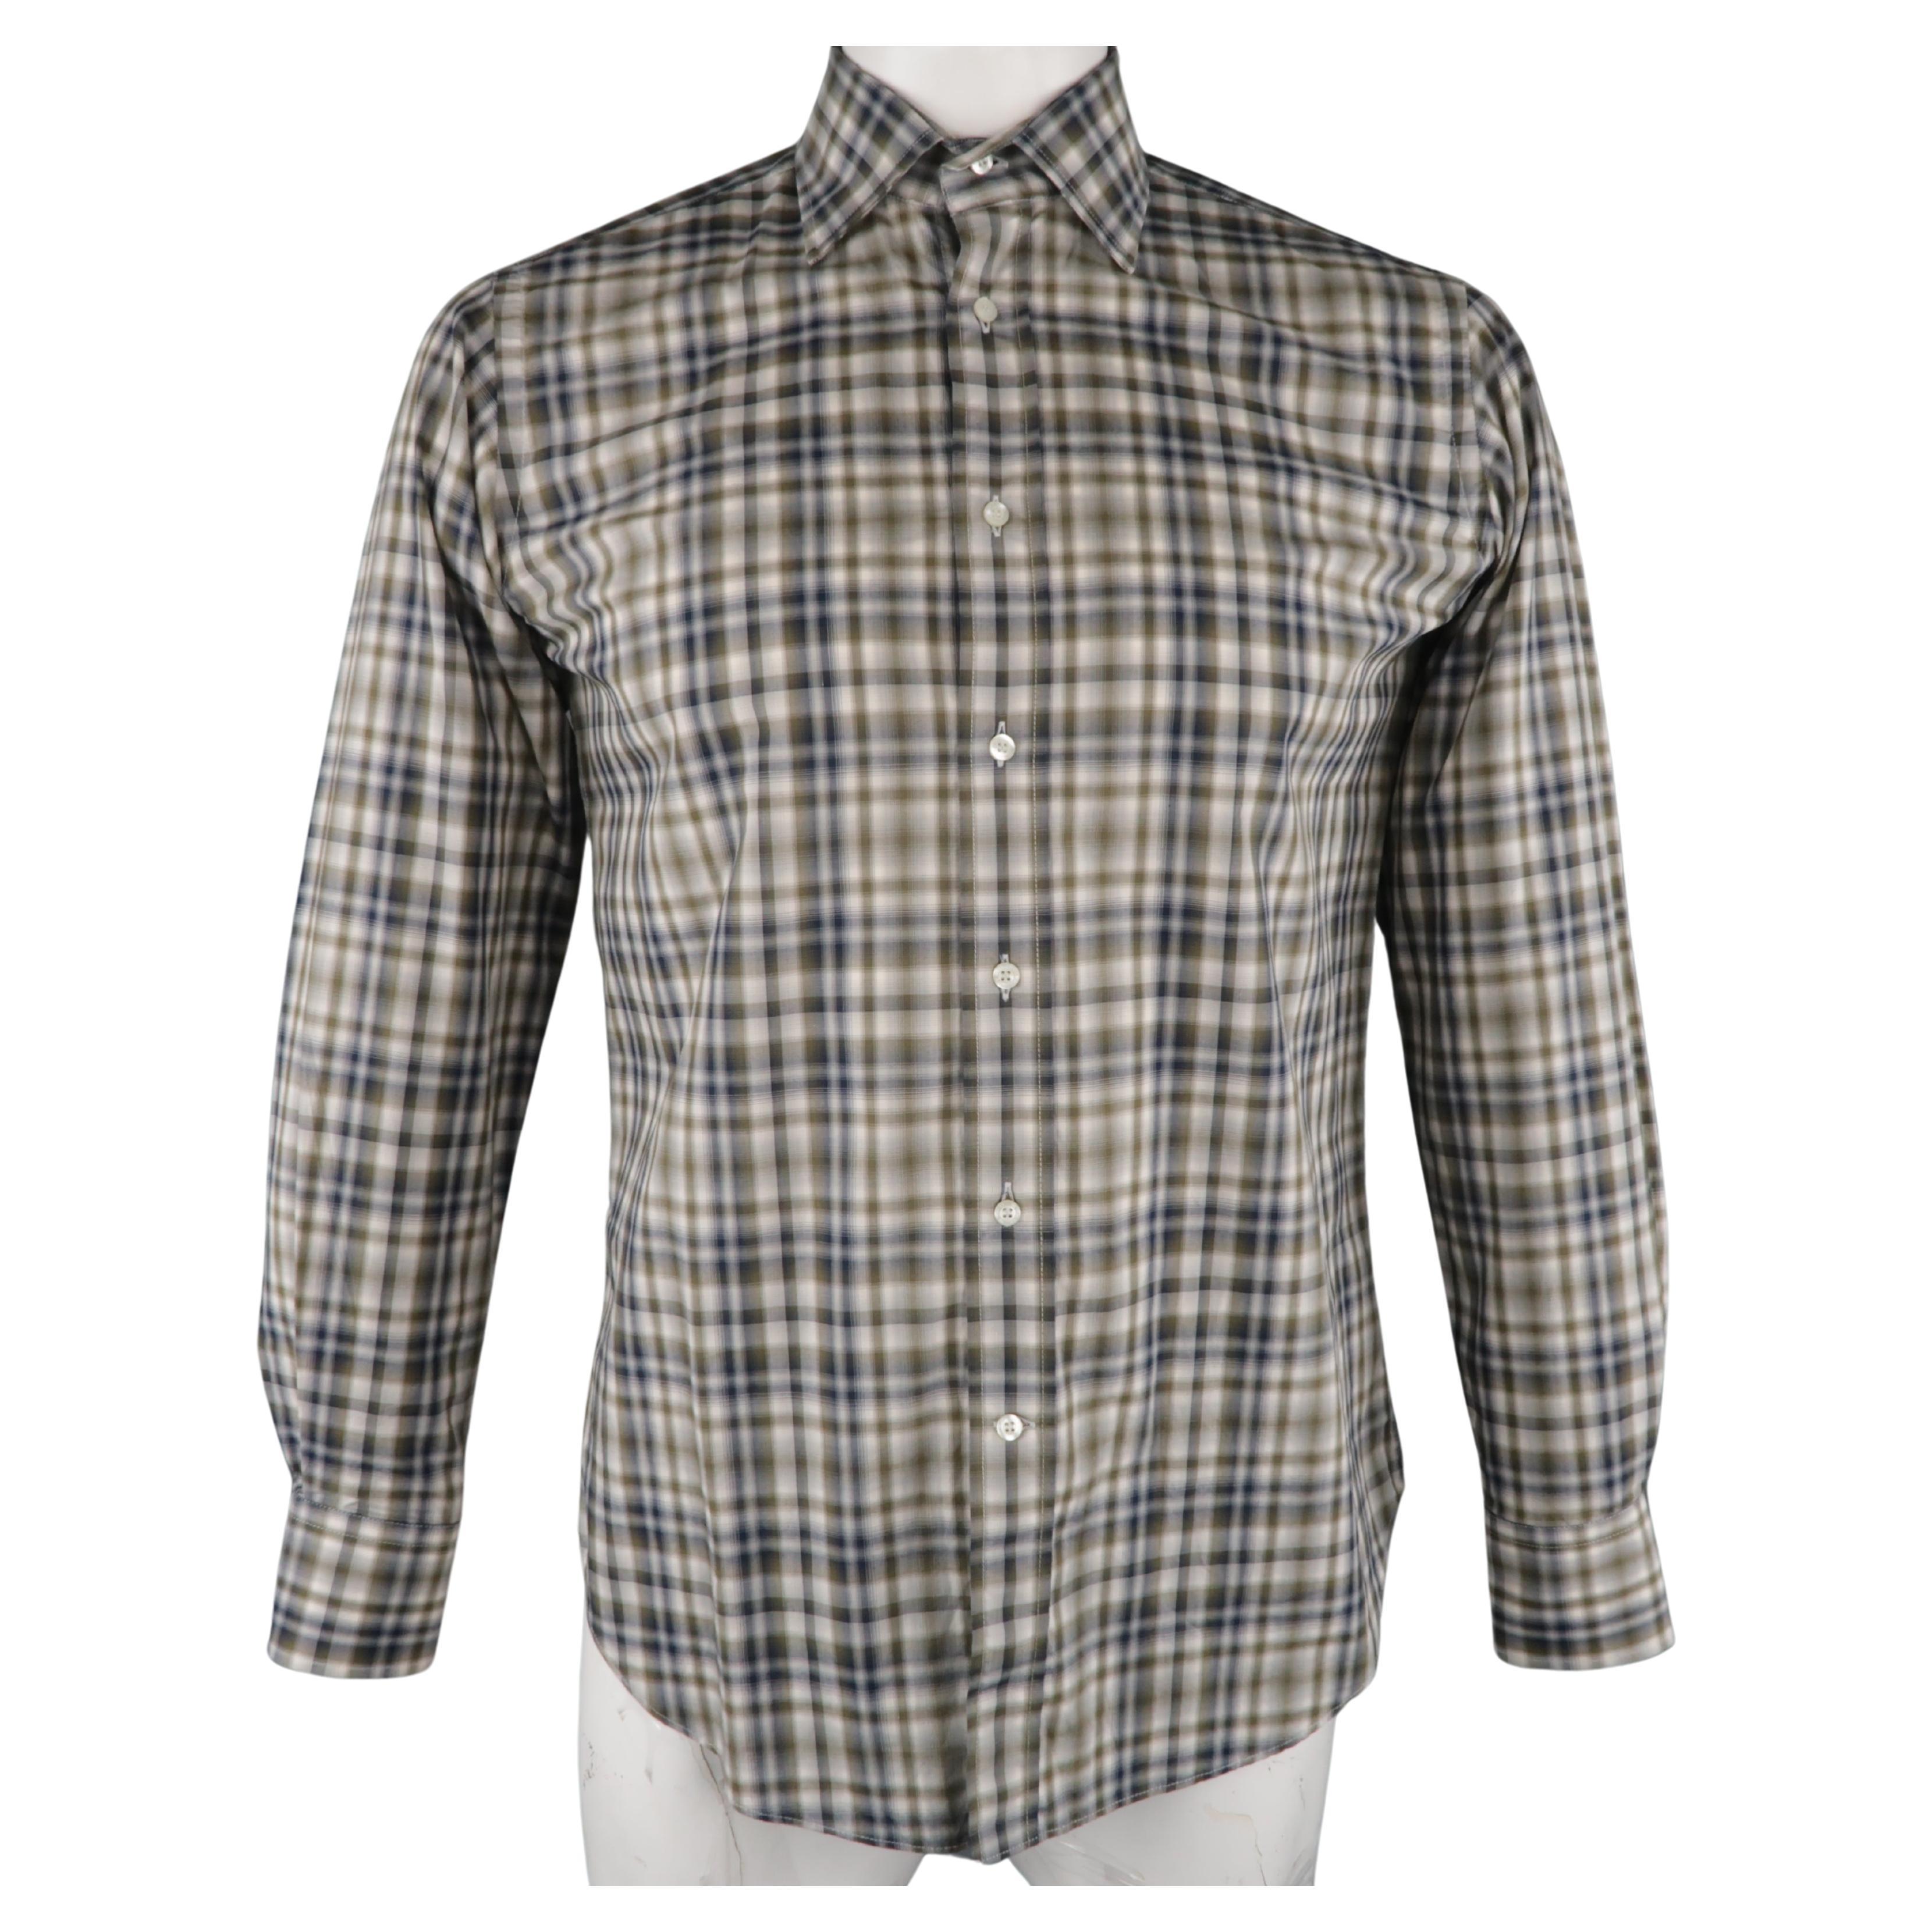 ETRO Size S Olive & Navy Plaid Button Up Long Sleeve Shirt For Sale